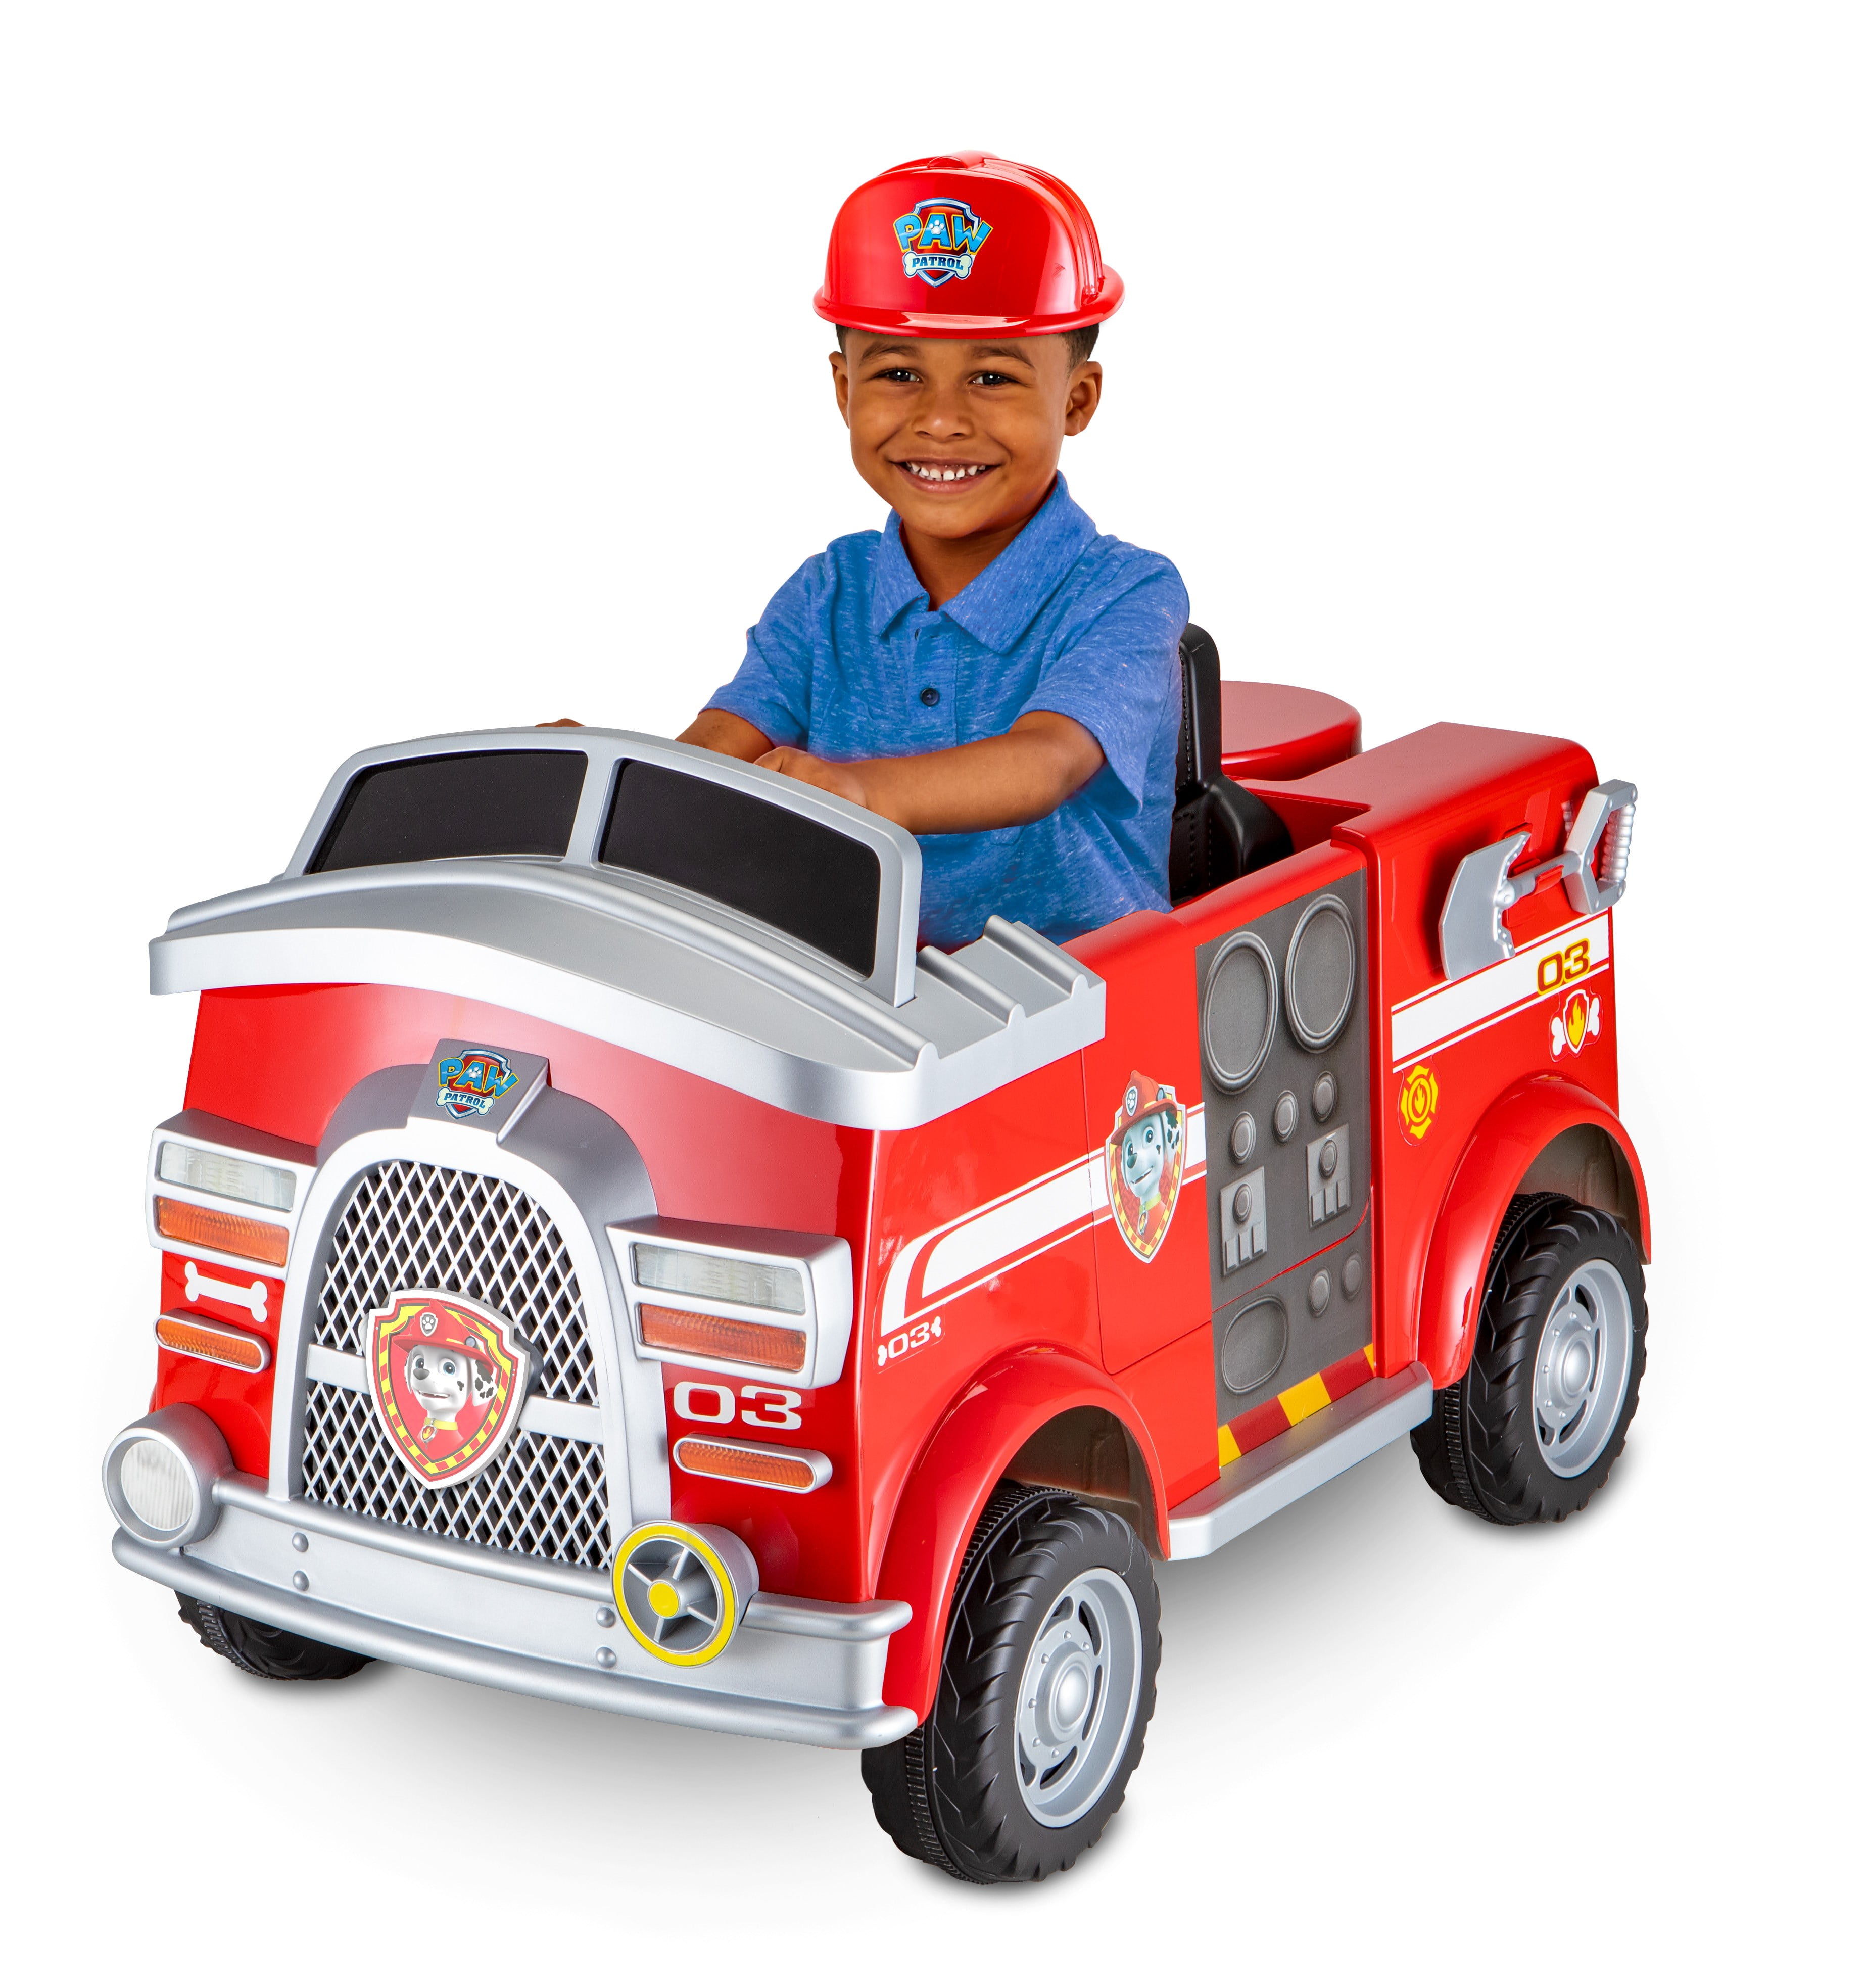 Paw Patrol Fire Truck 6 Volt powered Ride On Toy by Kid Trax, Marshall  rescue